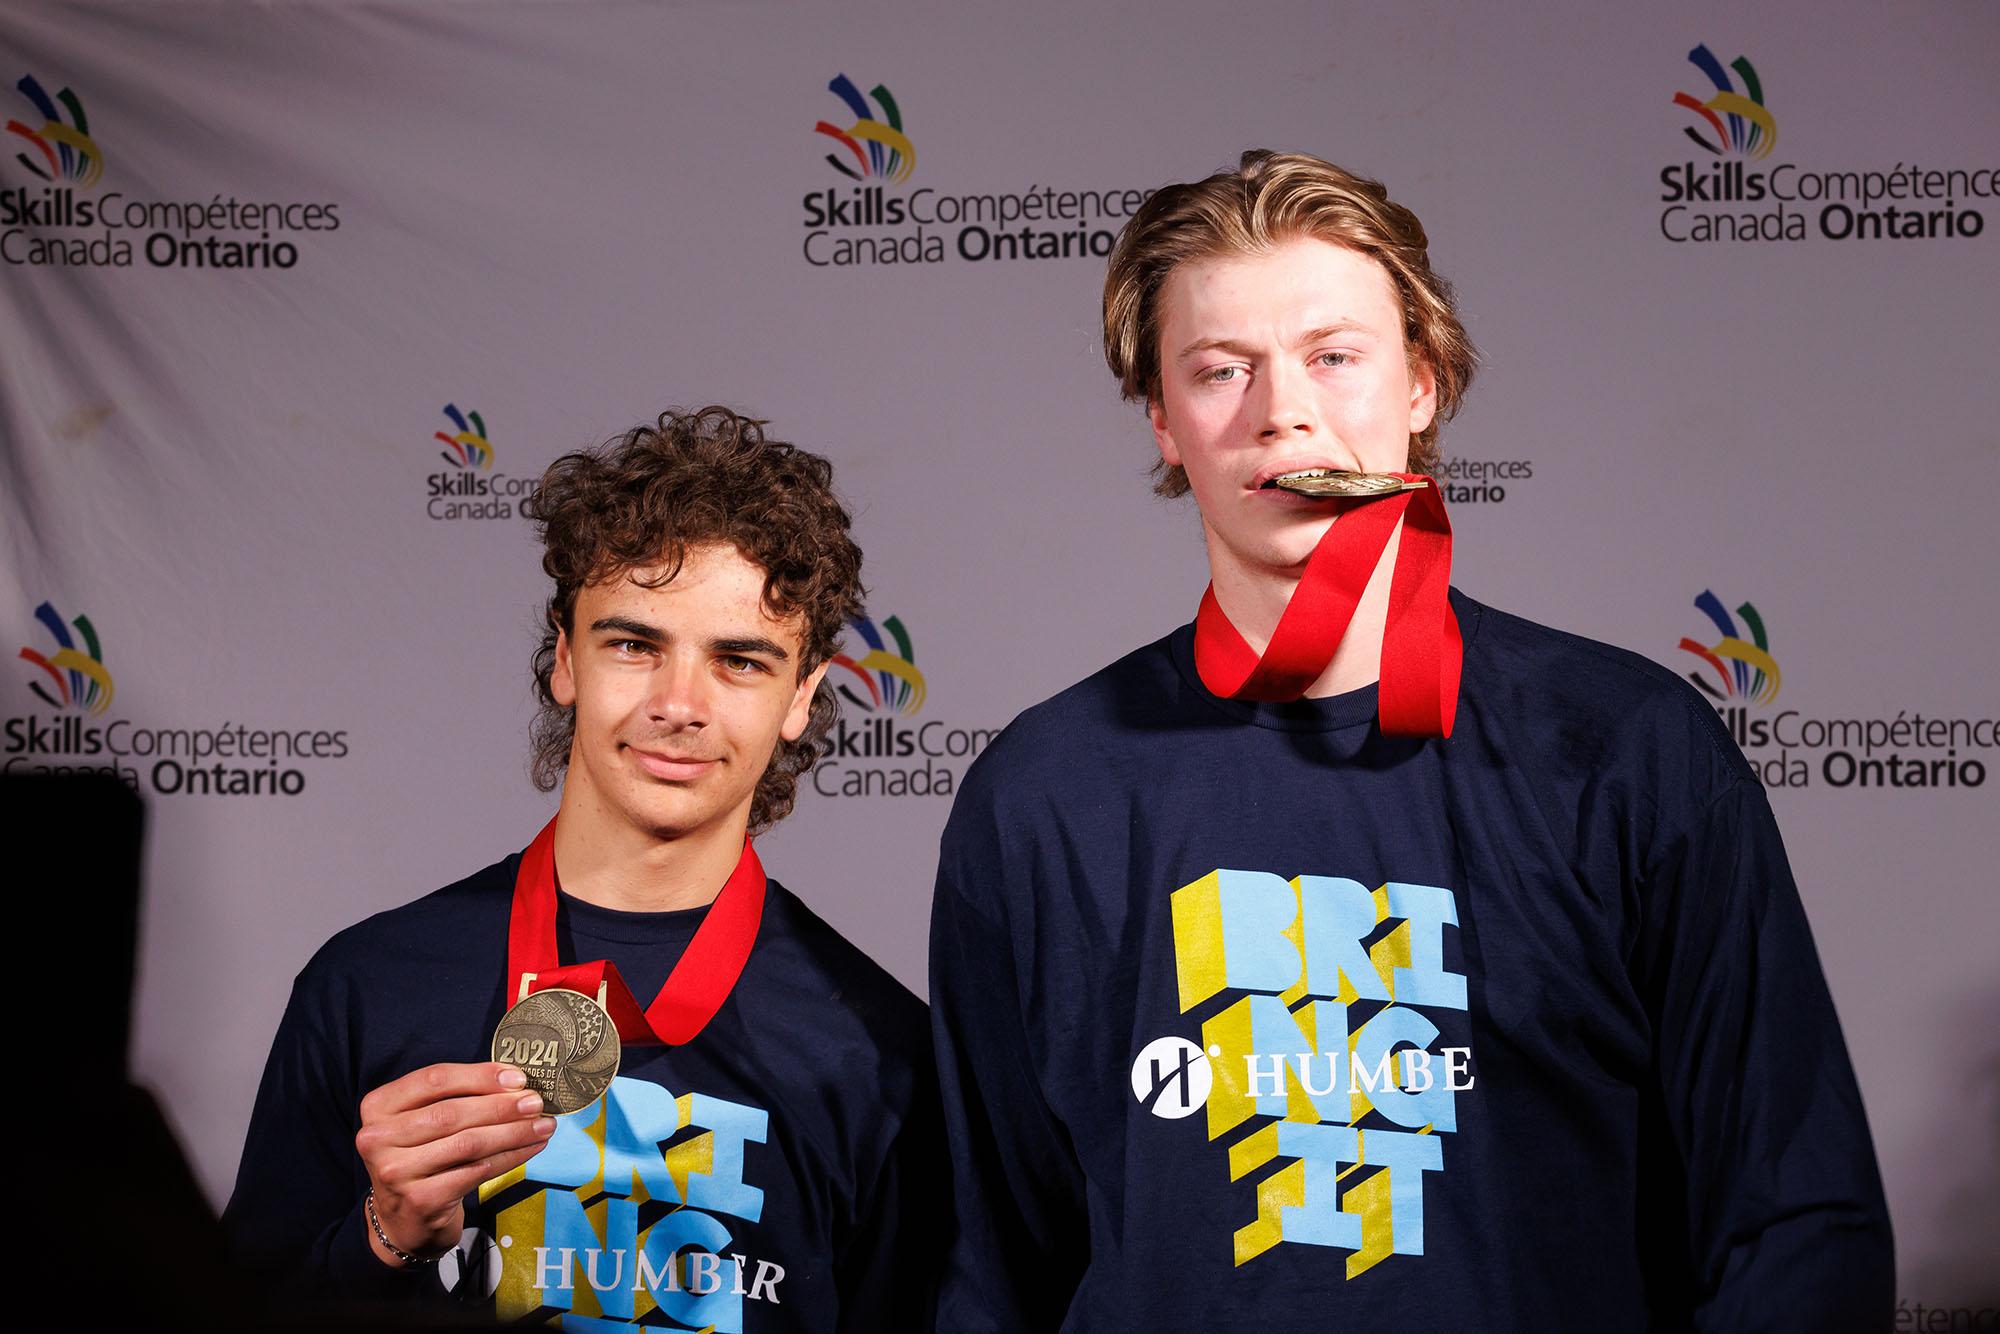 Two people wearing Humber shirts. One is holding up a medal and the other is biting a medal.